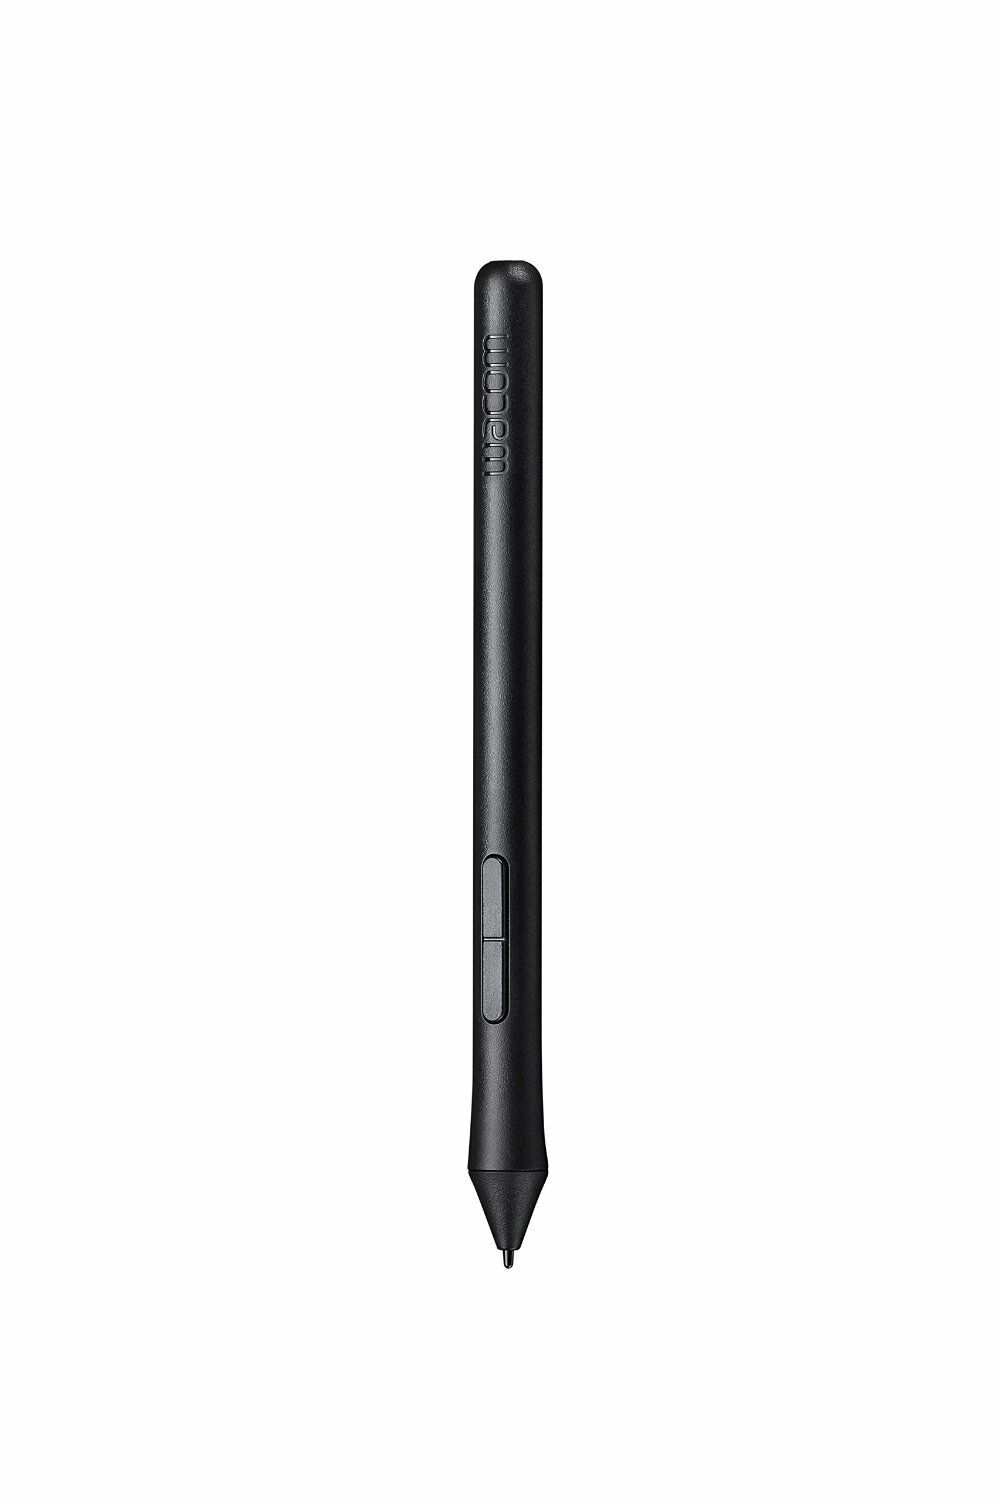 Wacom Stylus - Graphic Tablet Device Supported (lp190k)